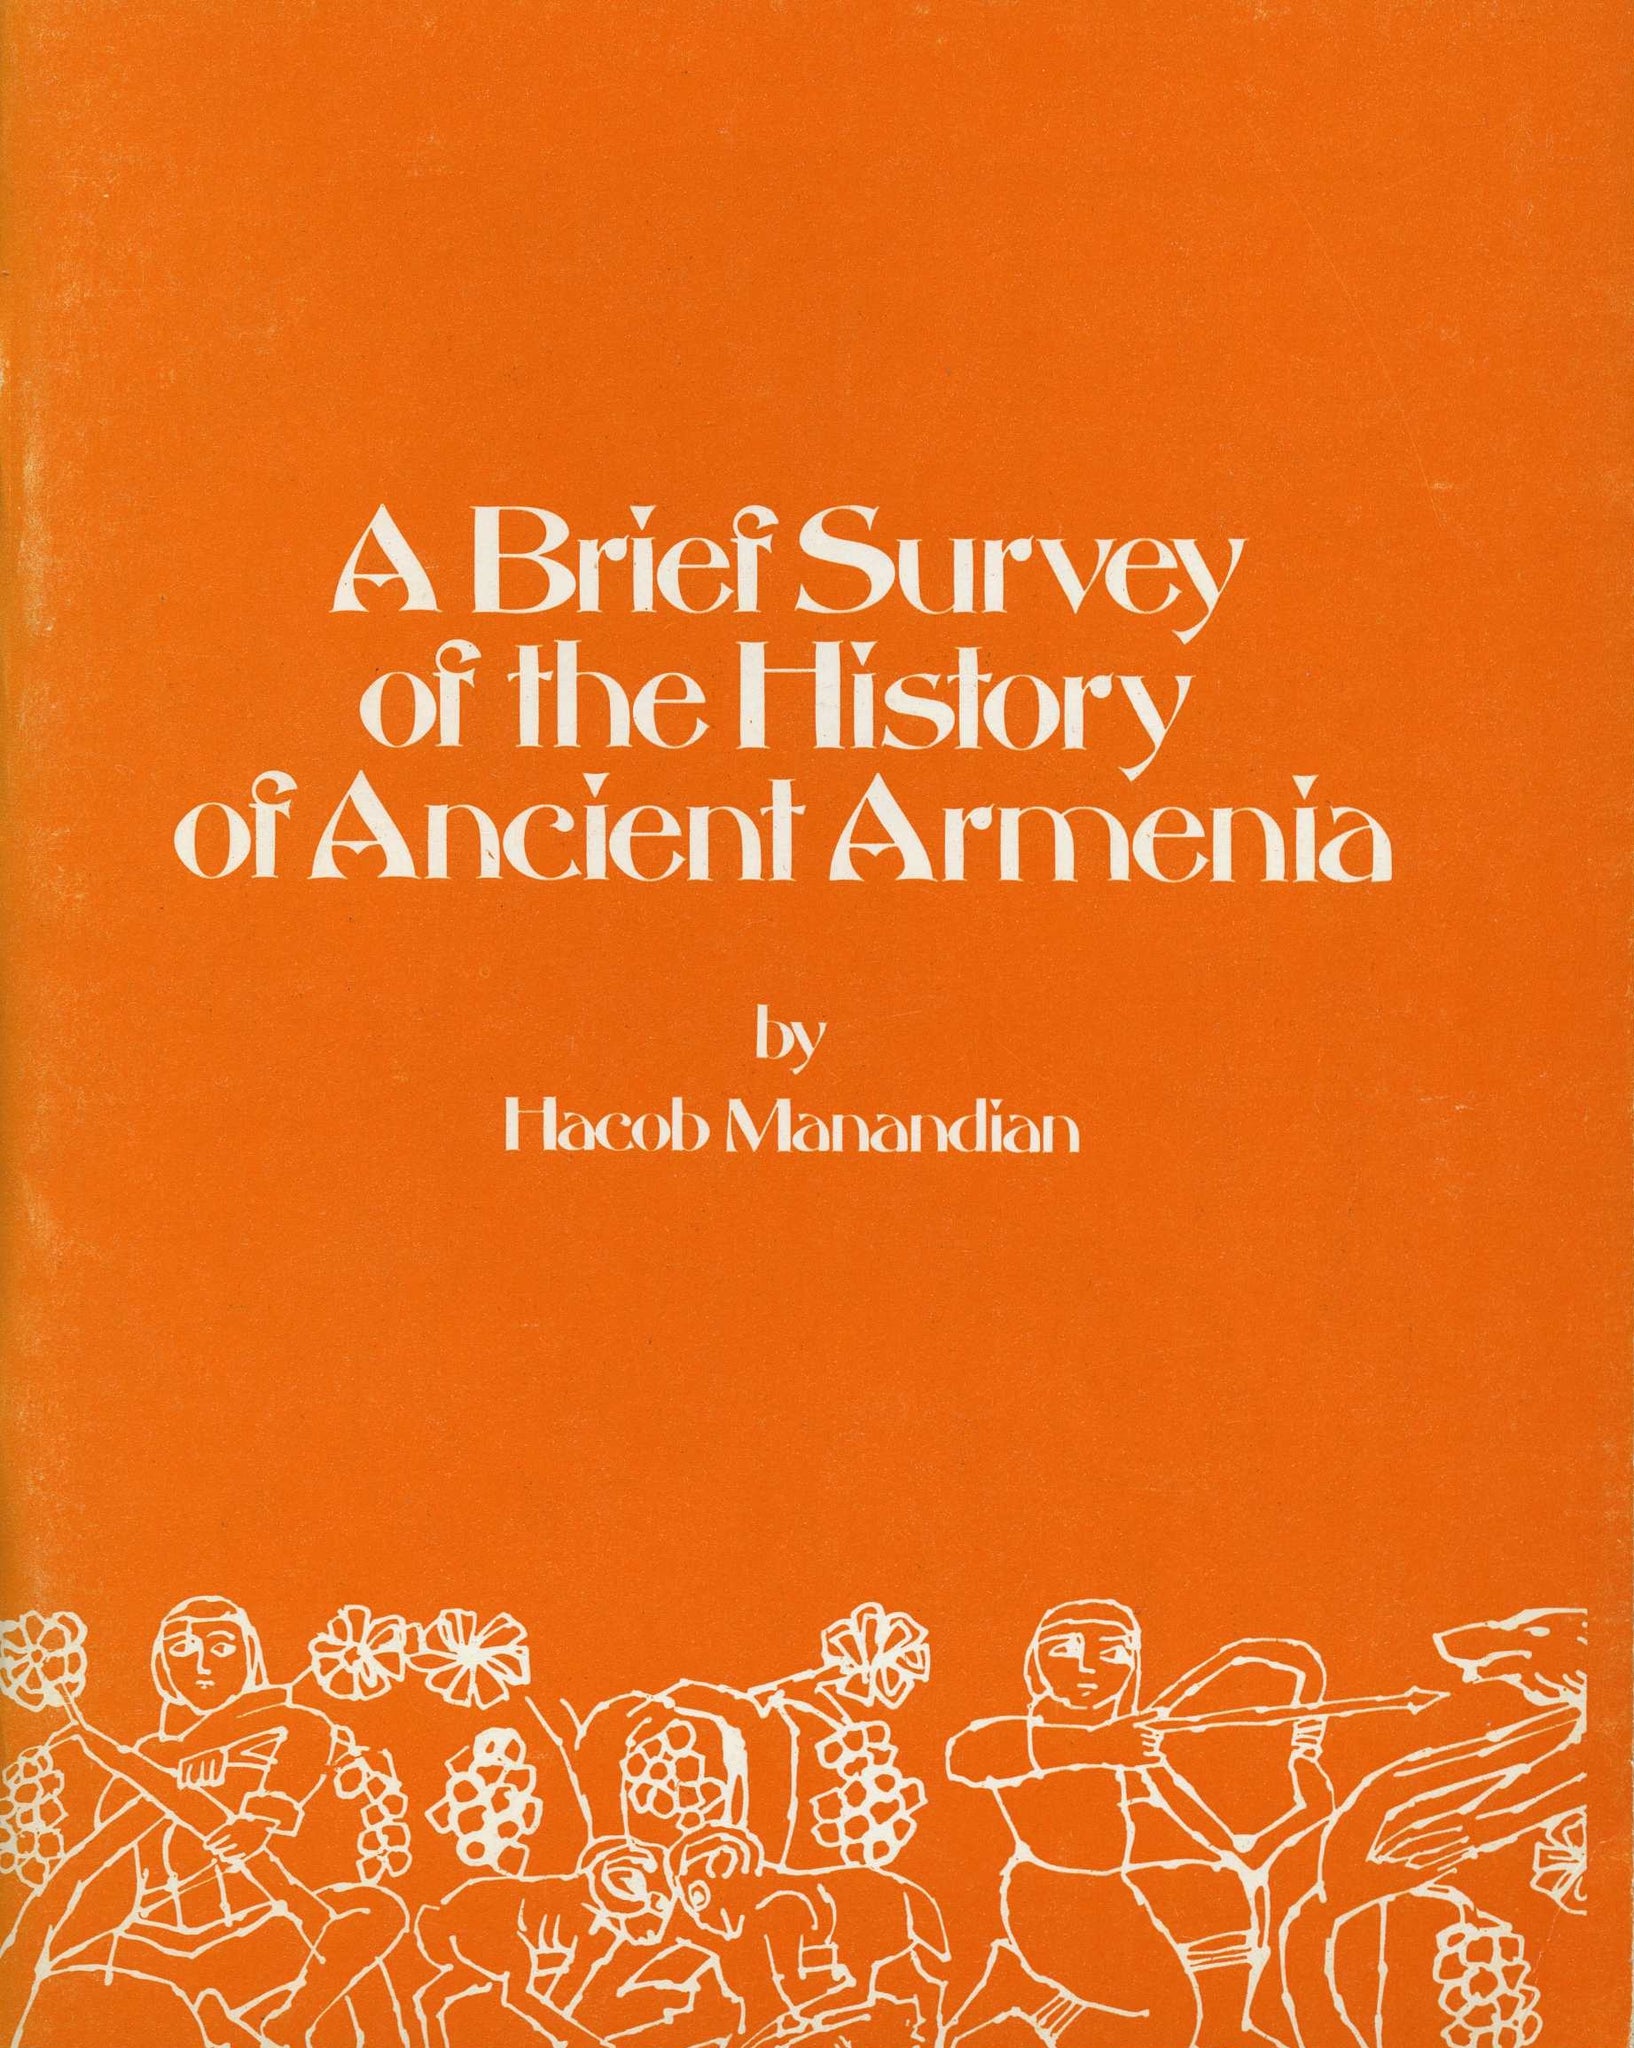 BRIEF SURVEY OF THE HISTORY OF ANCIENT ARMENIA, A